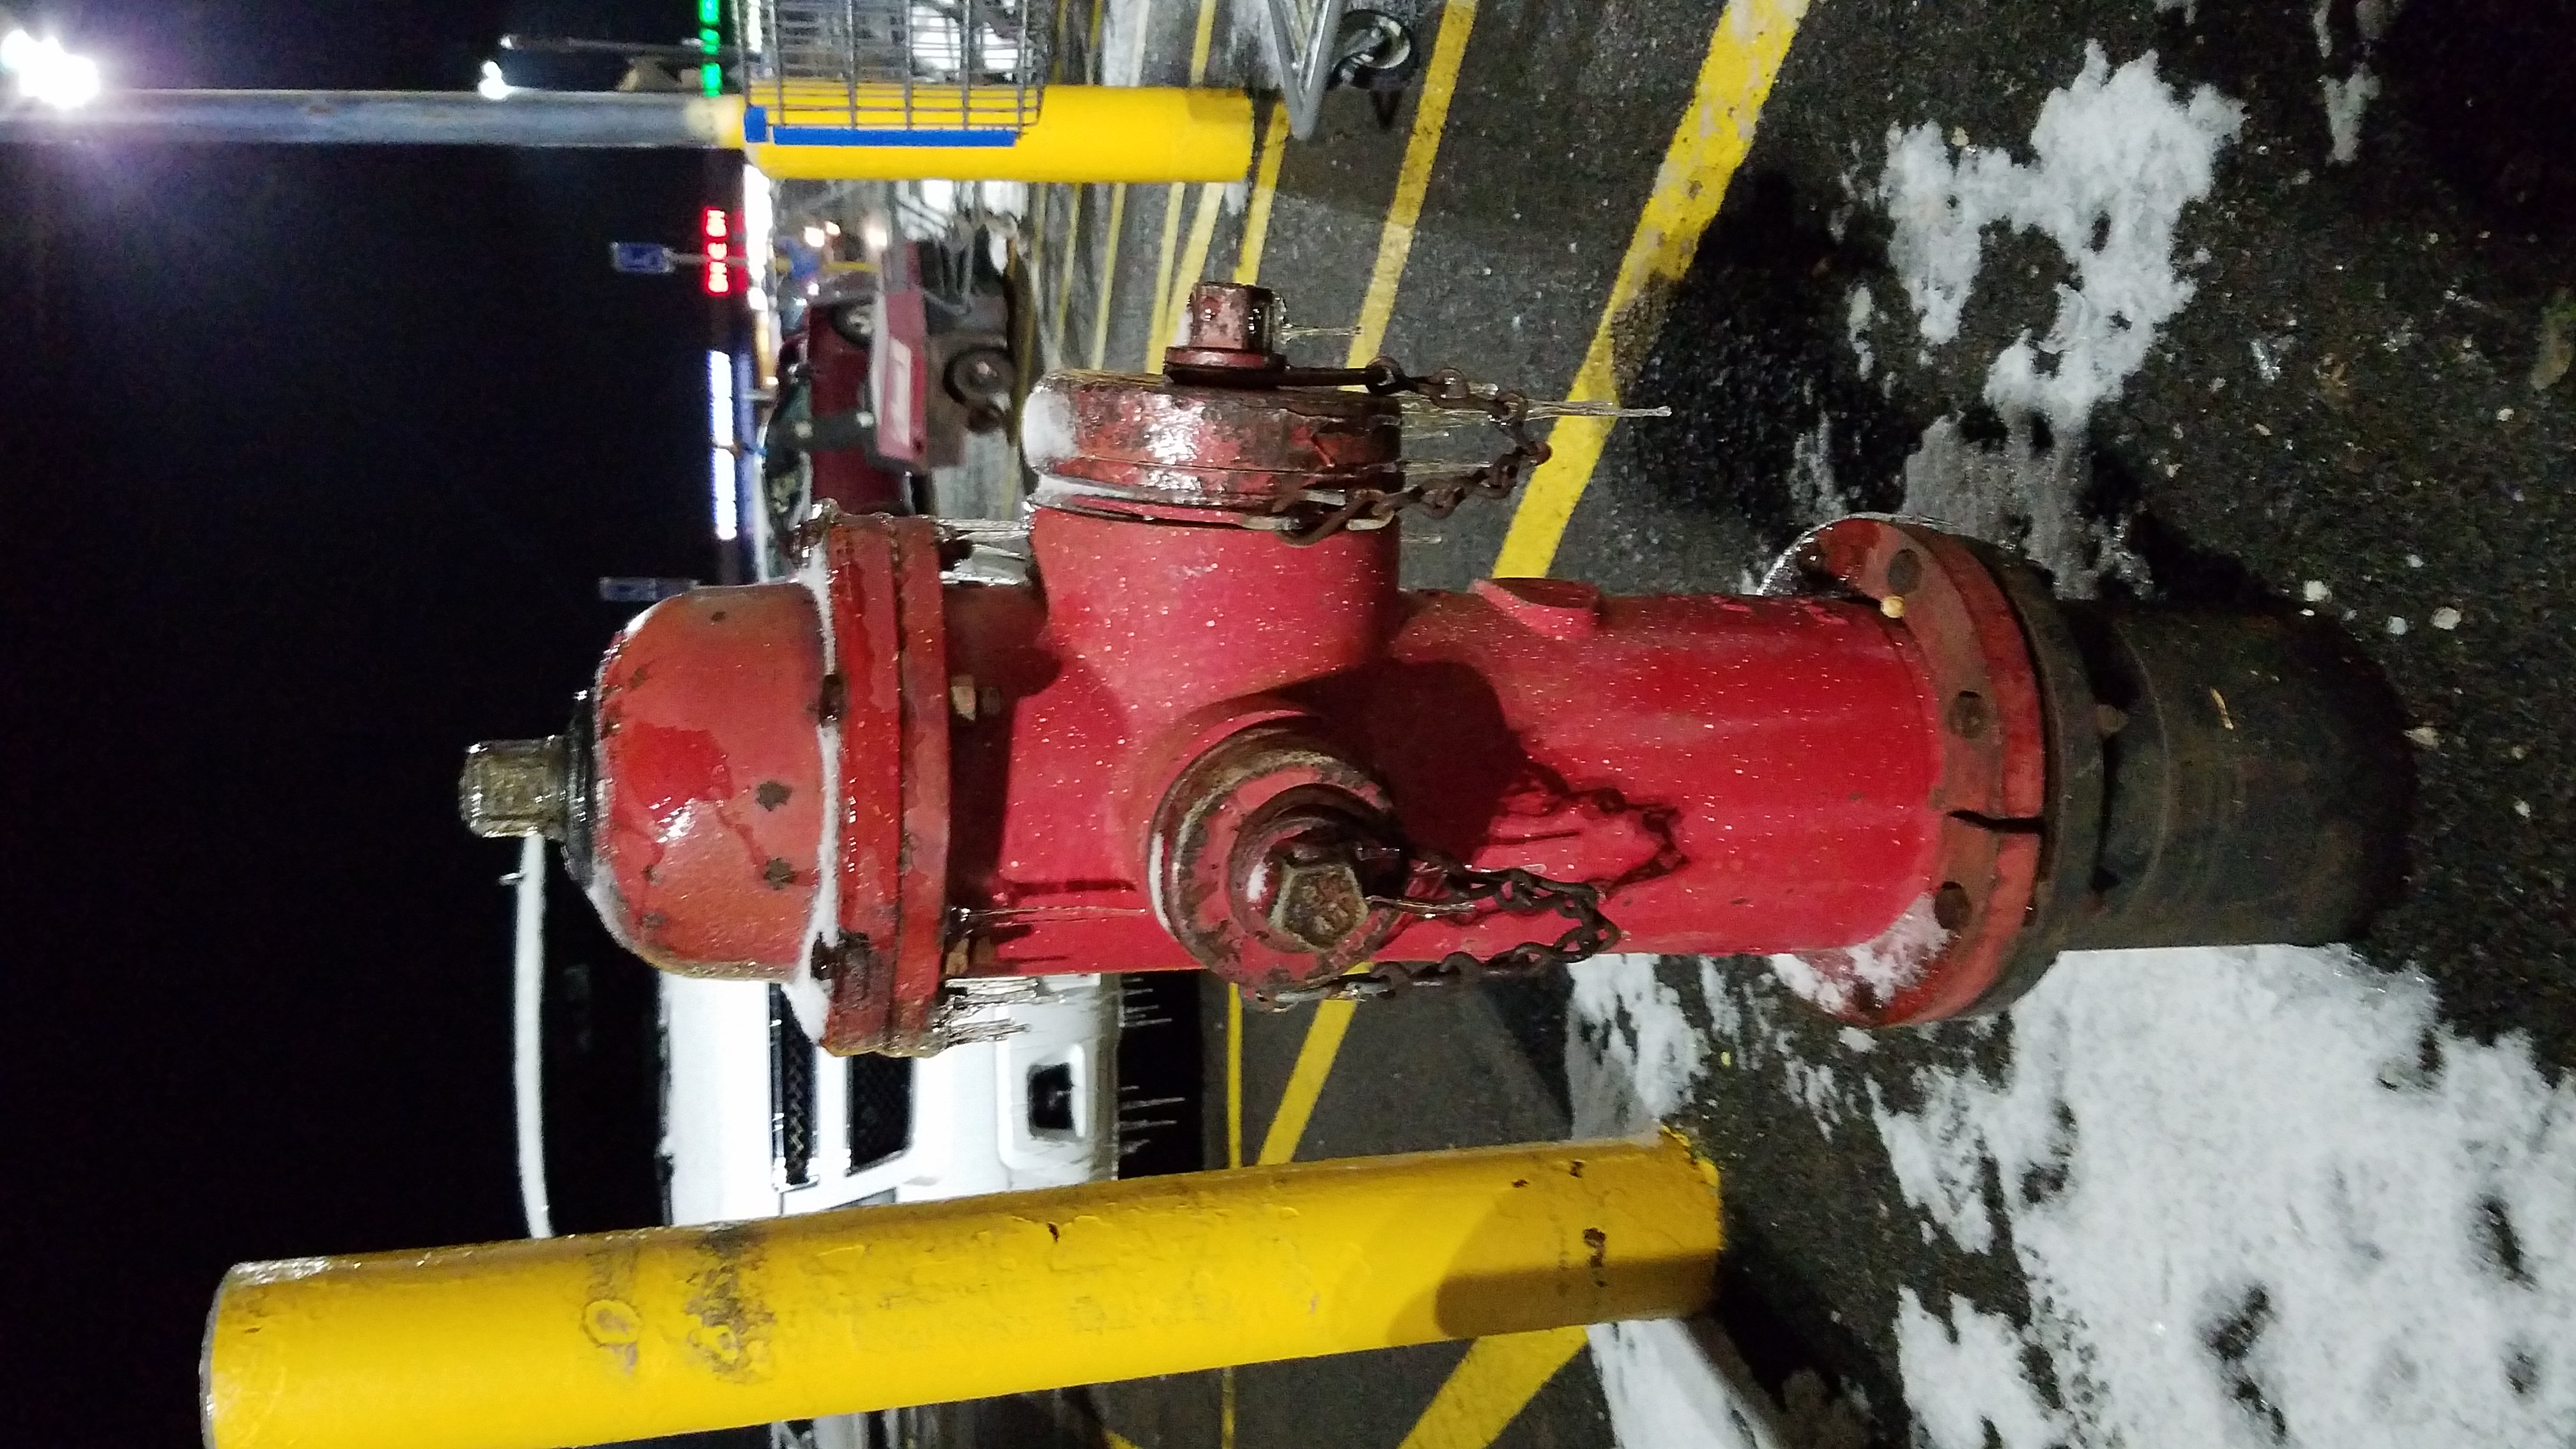 Hocking County ice storm, Car, Fire hydrant, Hocking, Hocking County, HQ Photo